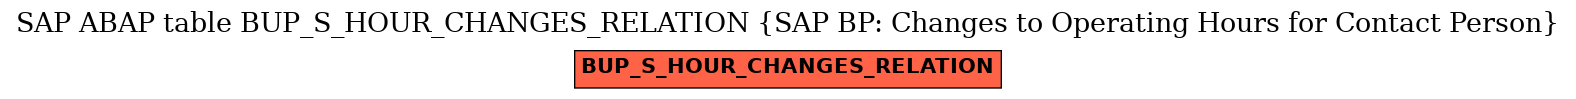 E-R Diagram for table BUP_S_HOUR_CHANGES_RELATION (SAP BP: Changes to Operating Hours for Contact Person)